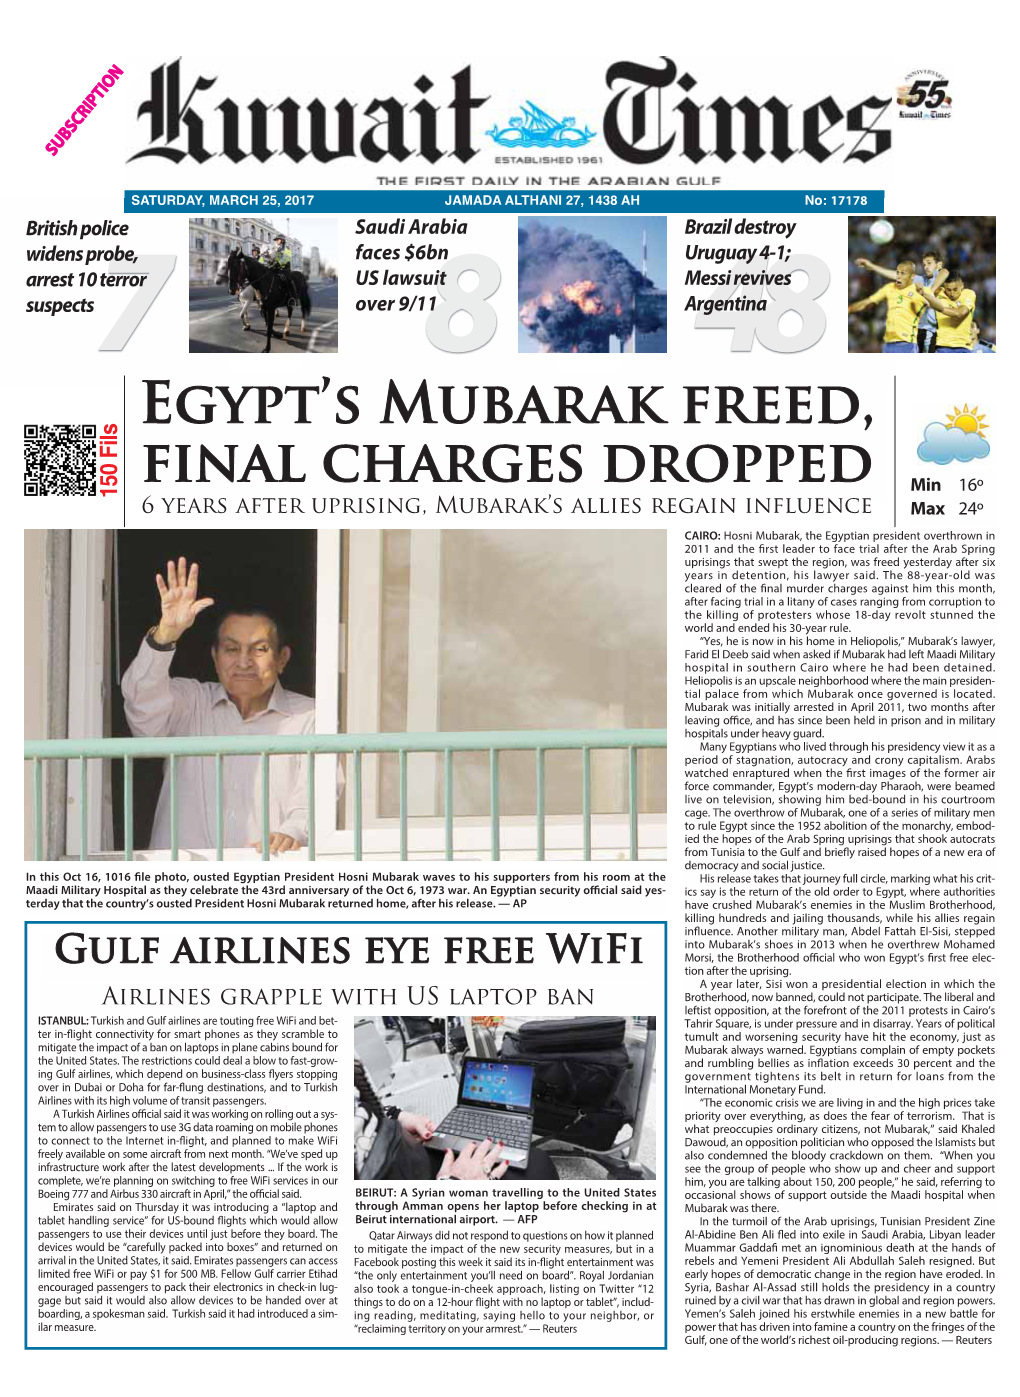 Egypt's Mubarak Freed, Final Charges Dropped